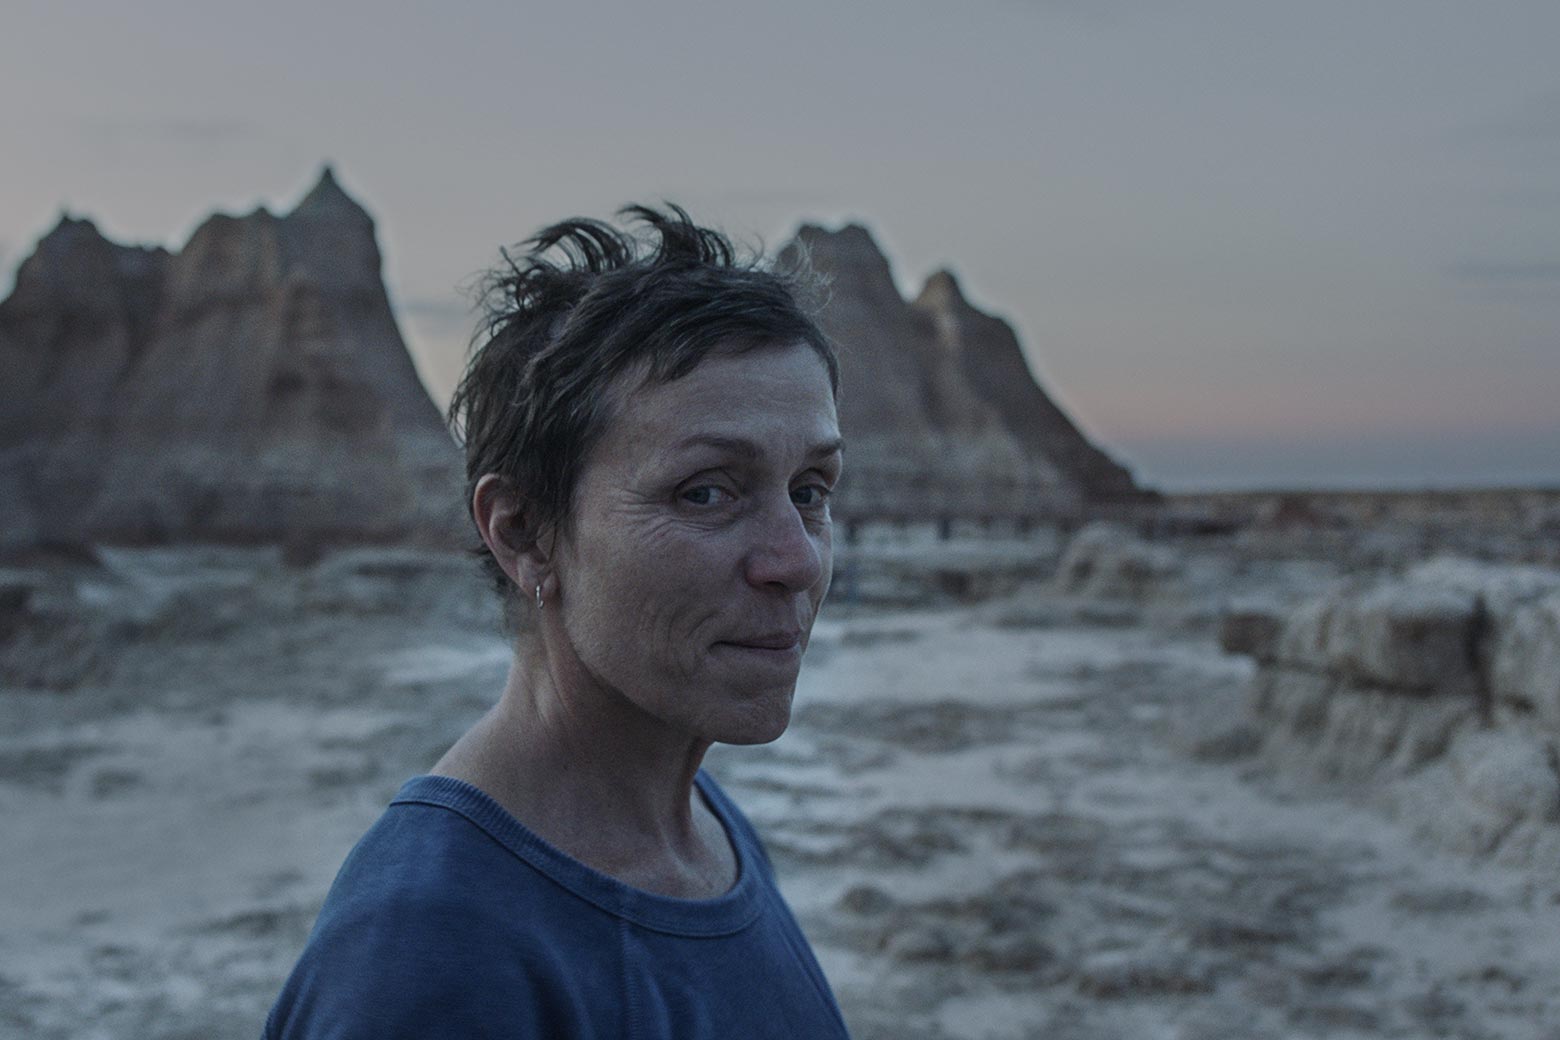 McDormand as Fern, smiling slightly as she stands in a desert landscape at sunset